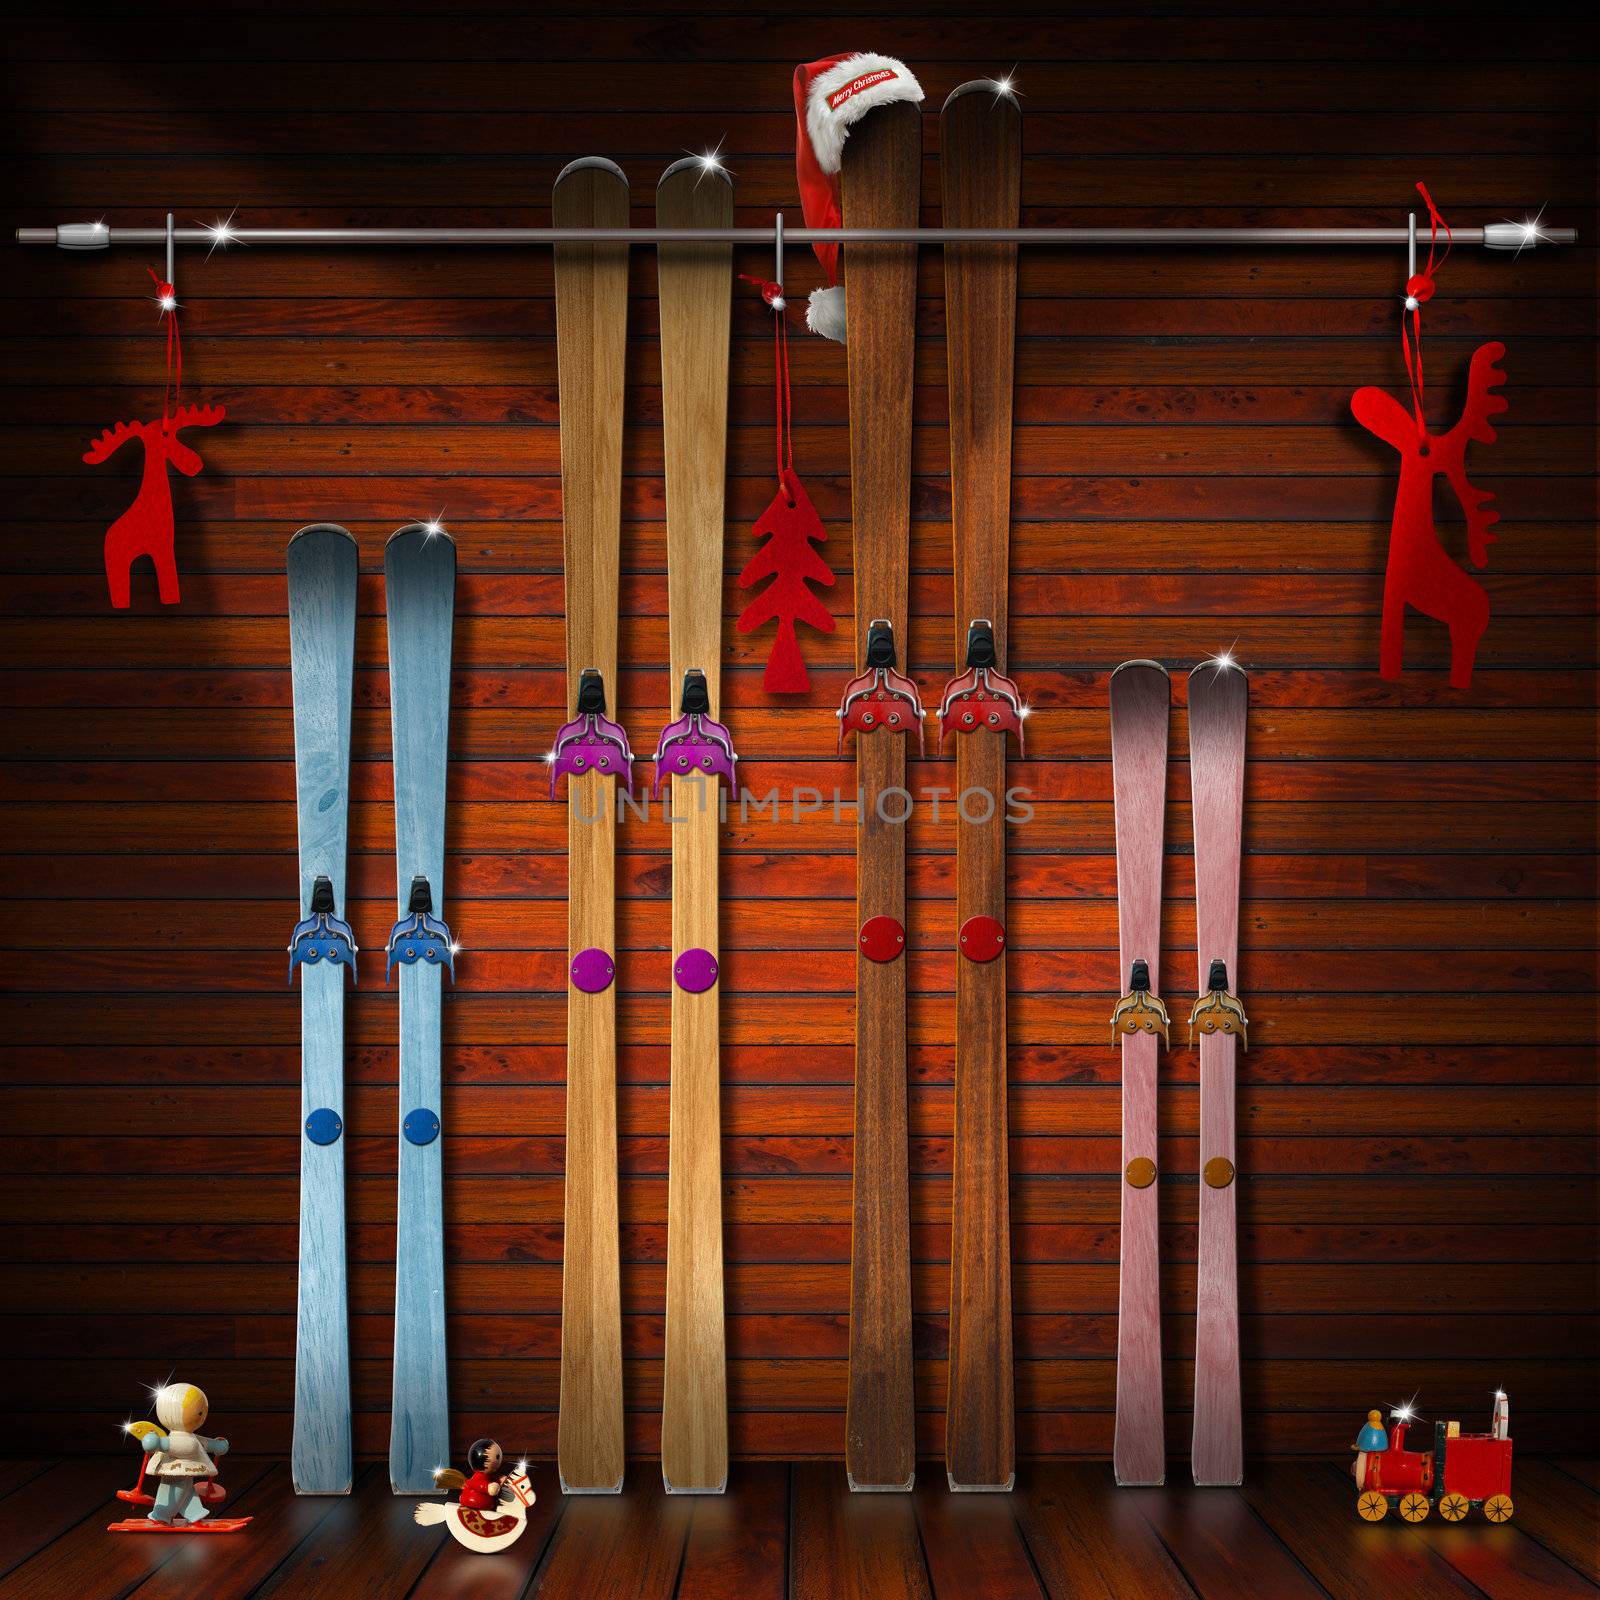 A pair of skis for each family member - winter holidays concept